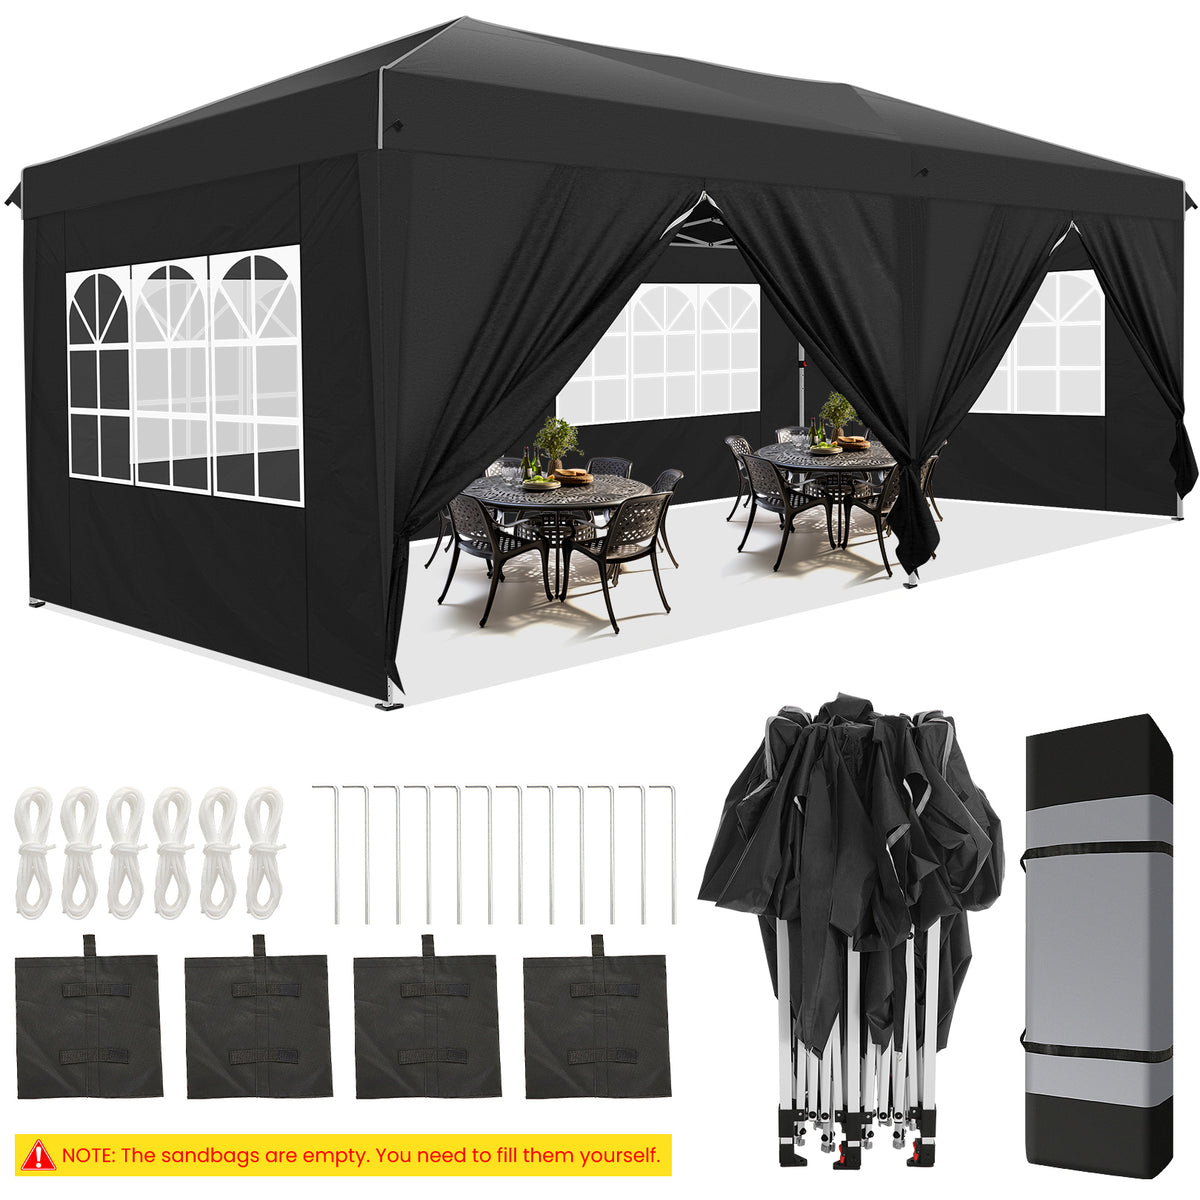 HOTEEL 10x20 Pop Up Canopy with Sidewalls,Easy Up Canopy Tent with Carry Bag,Outdoor Canopies with 4 Sandbags,Large Tents for Outdoor Events,Wedding,Backyard,Commercial,Black